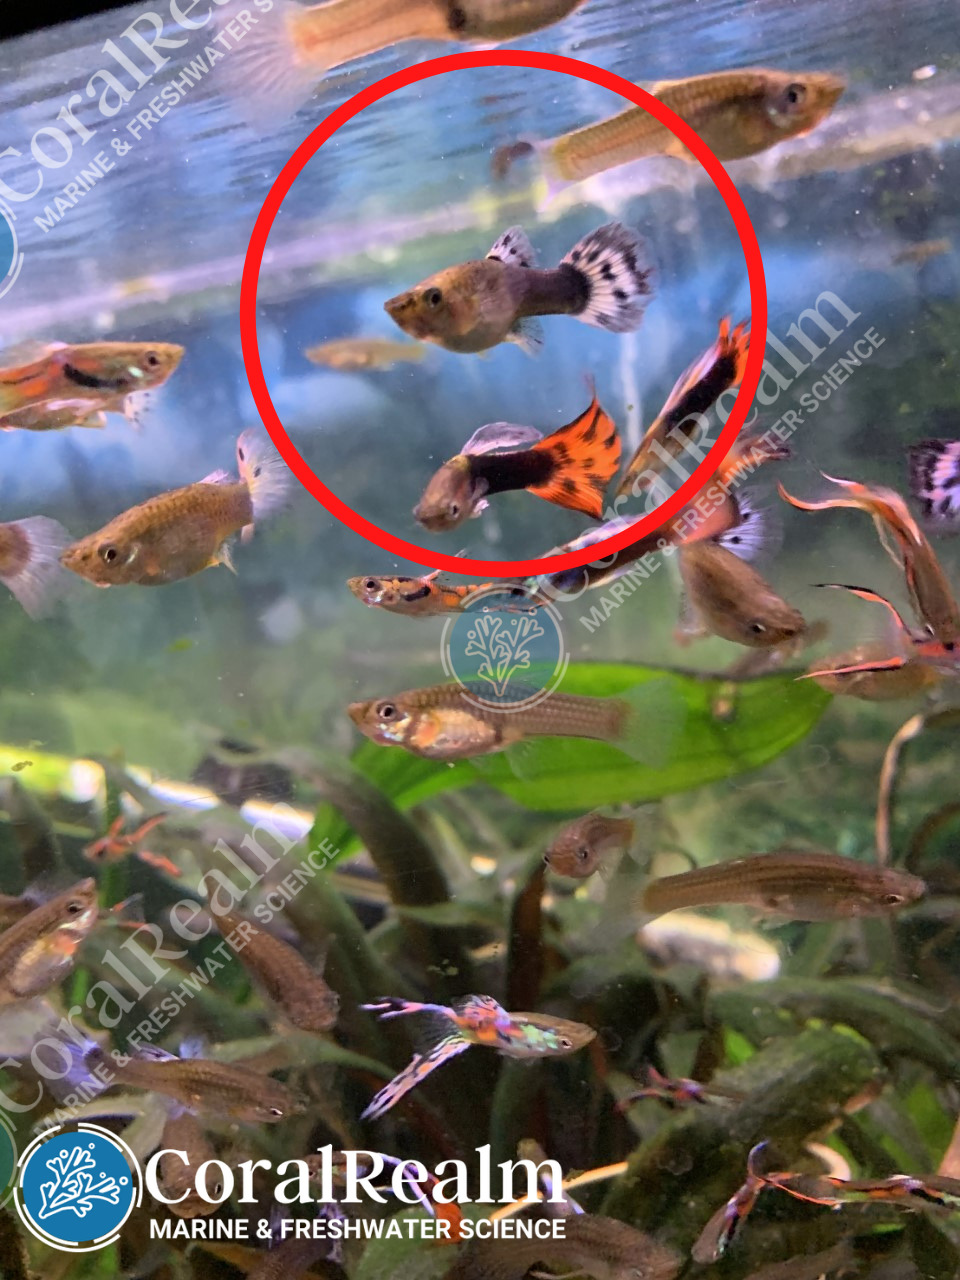 female guppy similar to crowntail